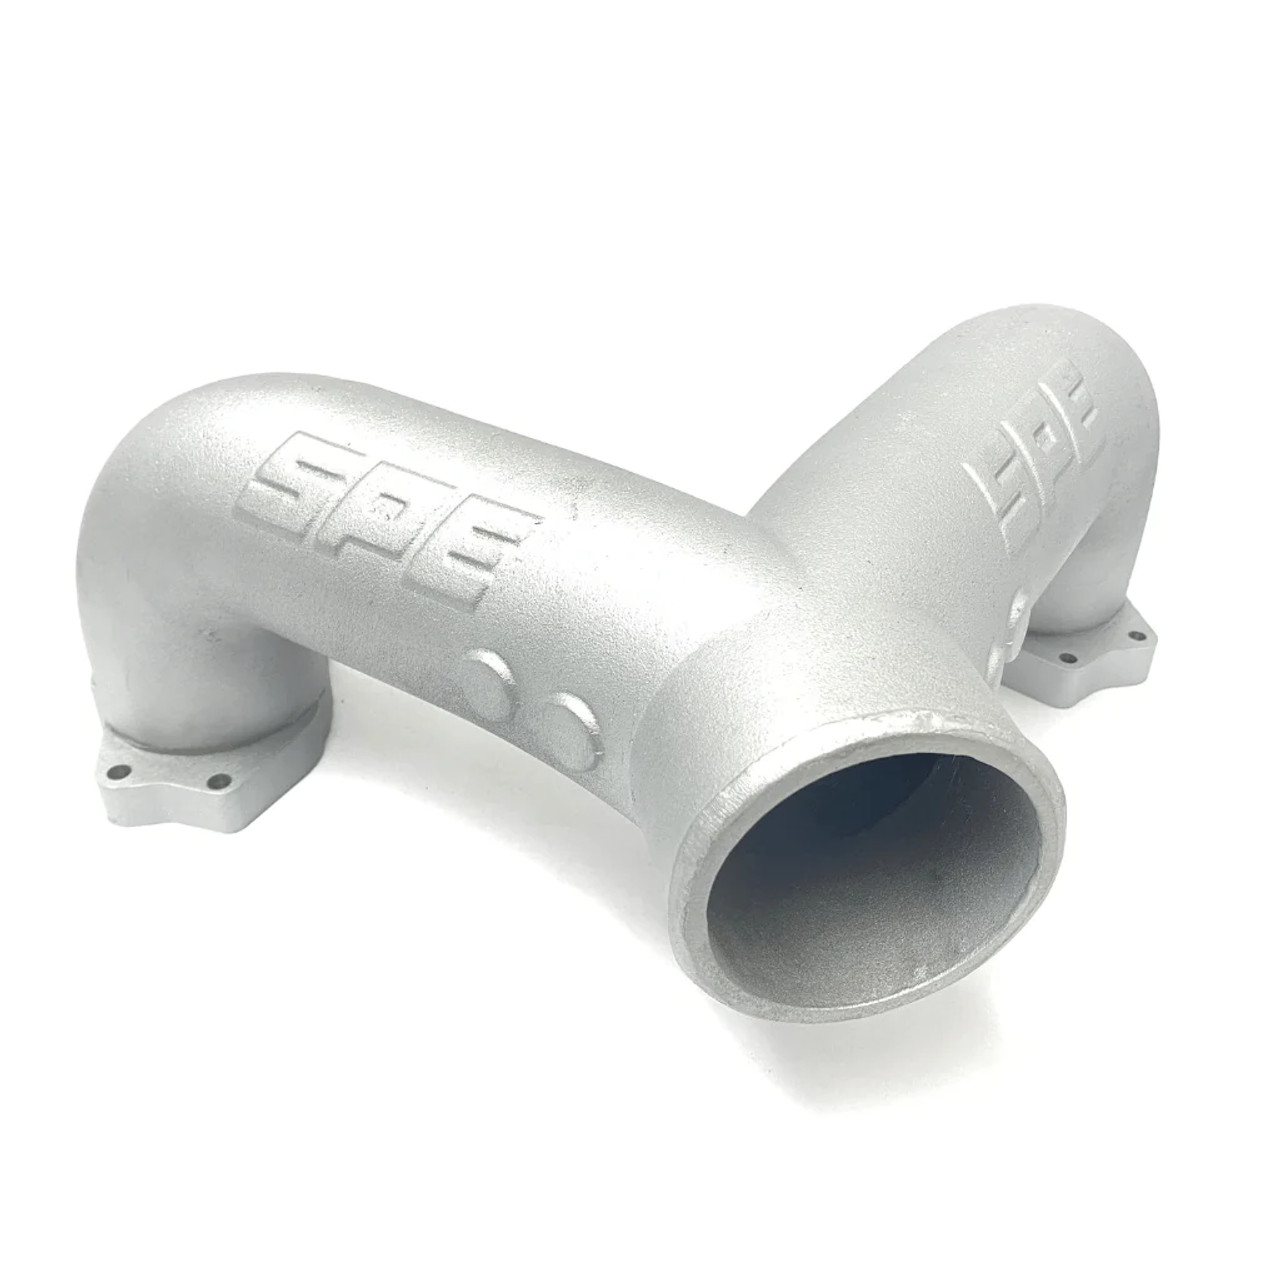 SPE Intake Piping Kit for Ford 6.7L Ford Powerstroke (SPE6.7L_INTAKEPK) Y Bridge View